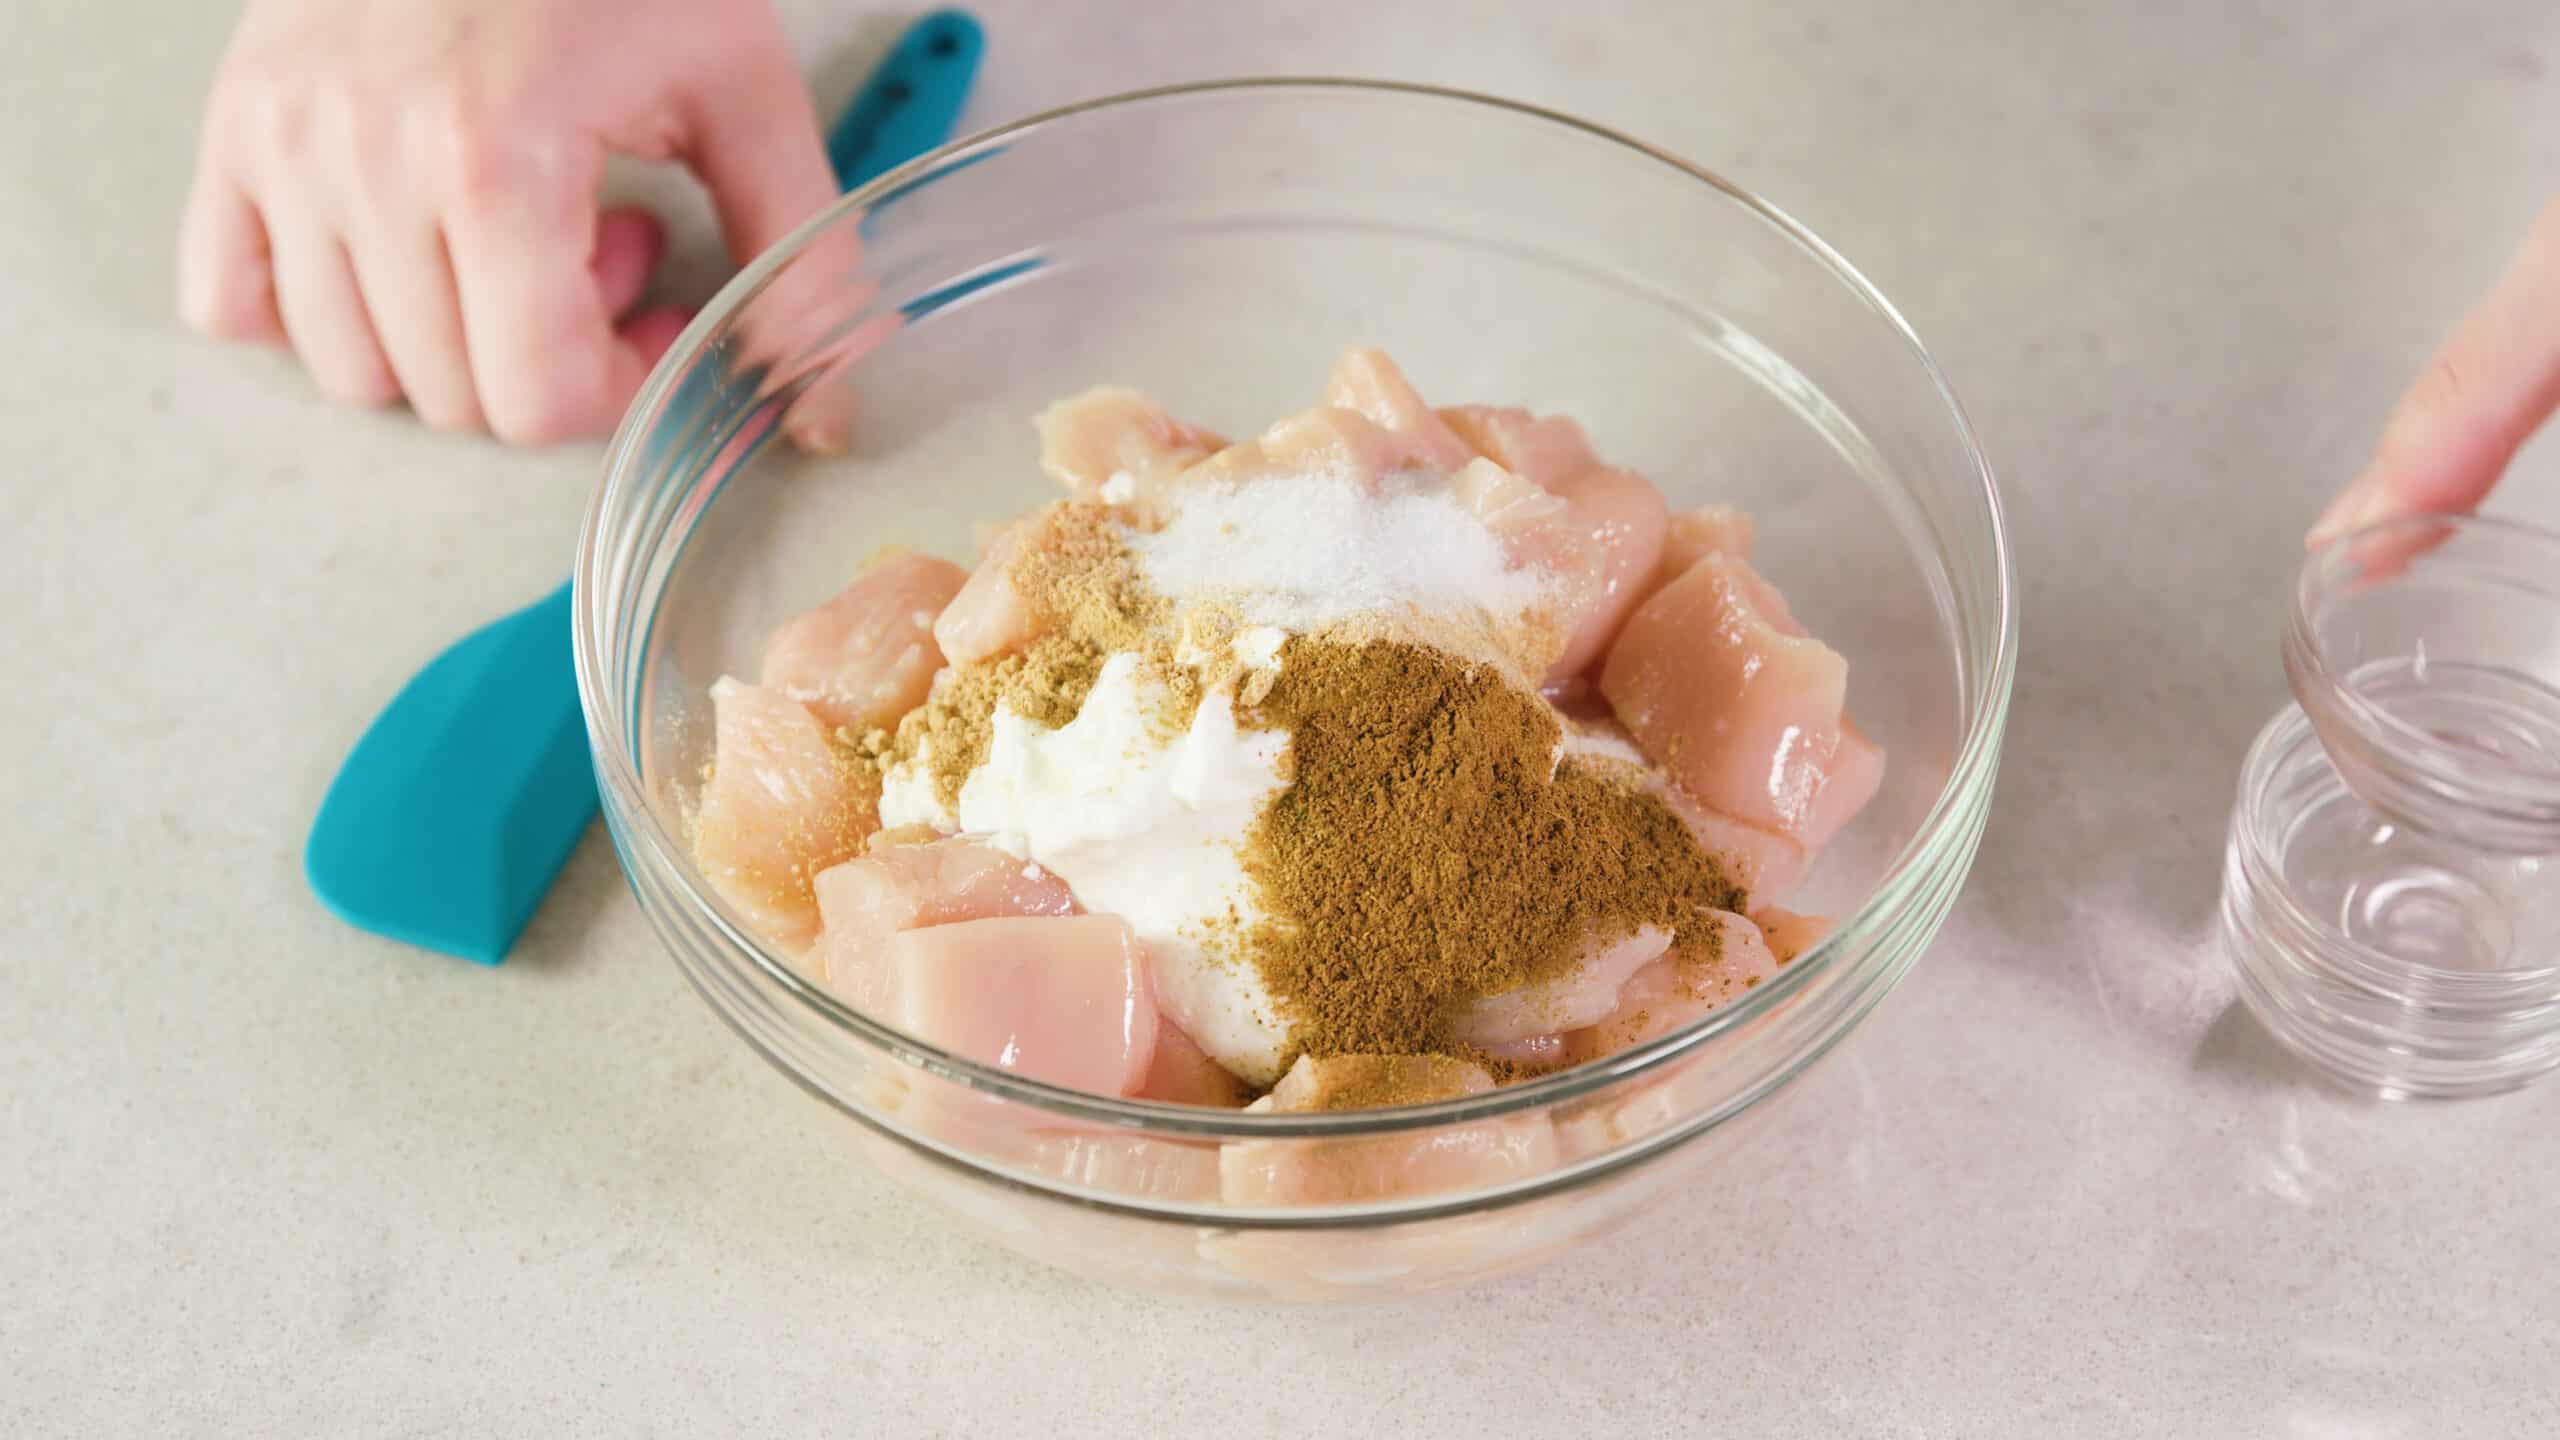 Angled view of clear glass mixing bowl filled with all ingredients and spices for the chicken and marinade ready to be combined with a plastic spatula.